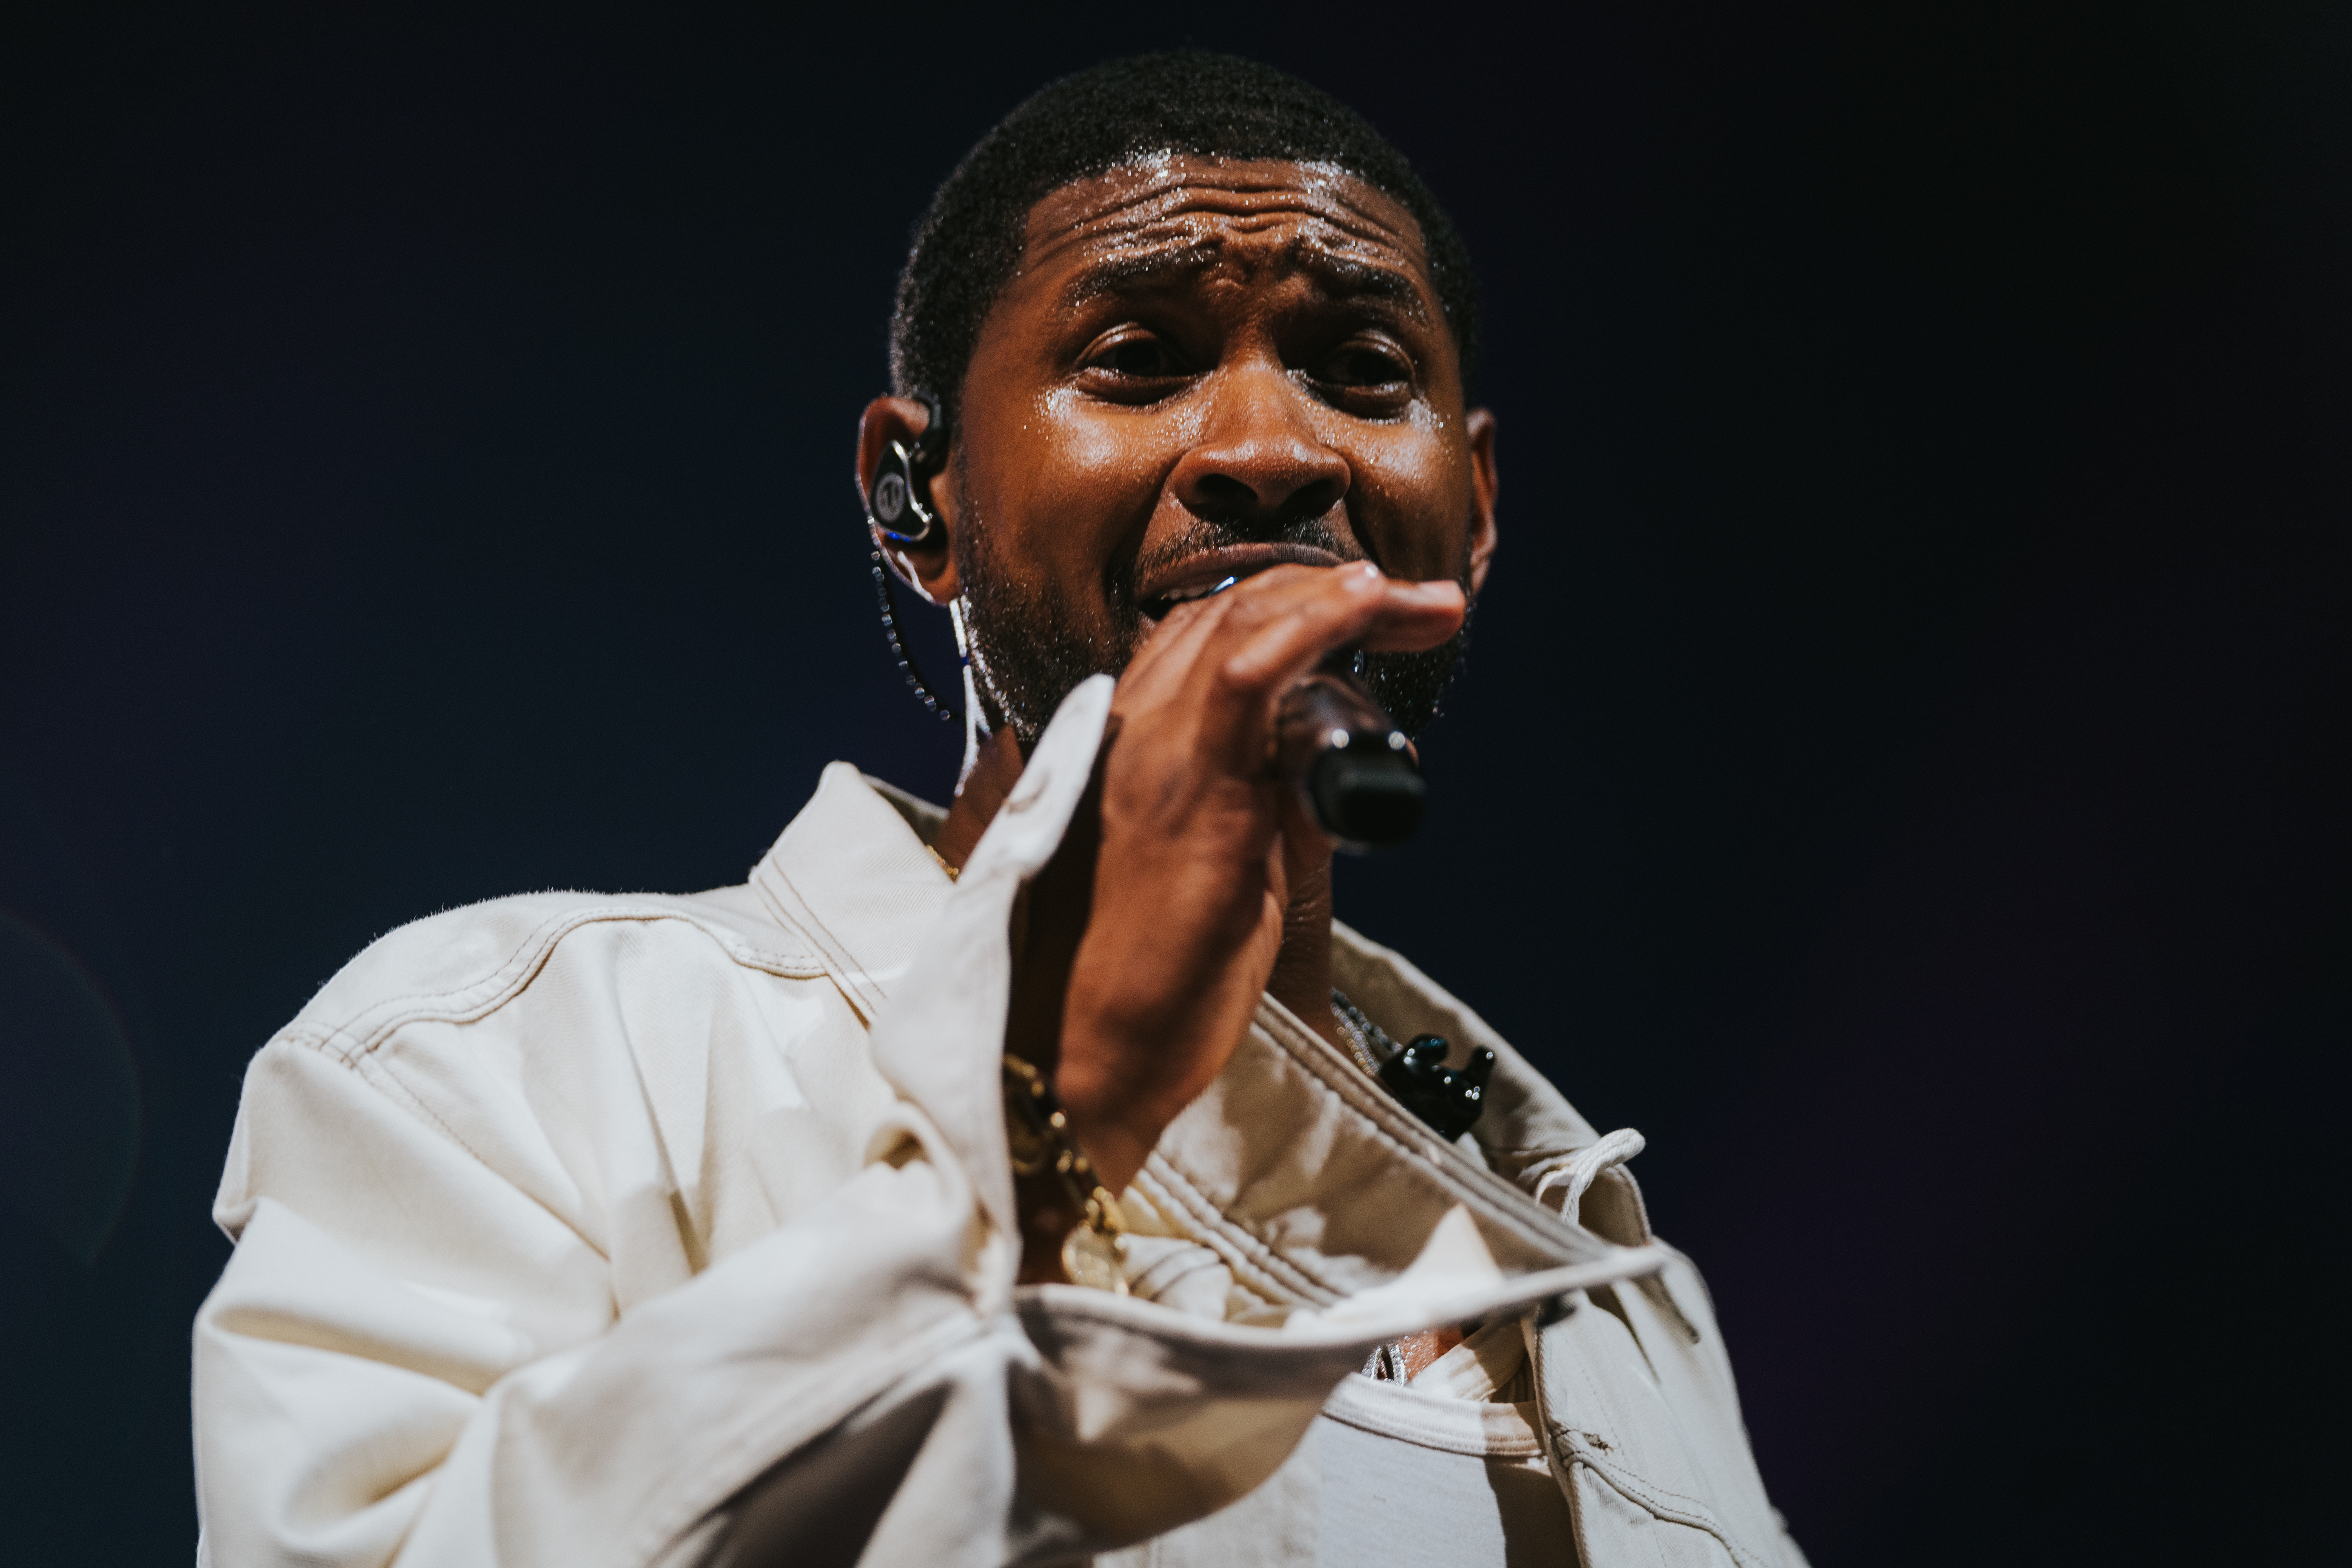 21 Savage Joined Usher To Sing His Song 'My Boo' Live